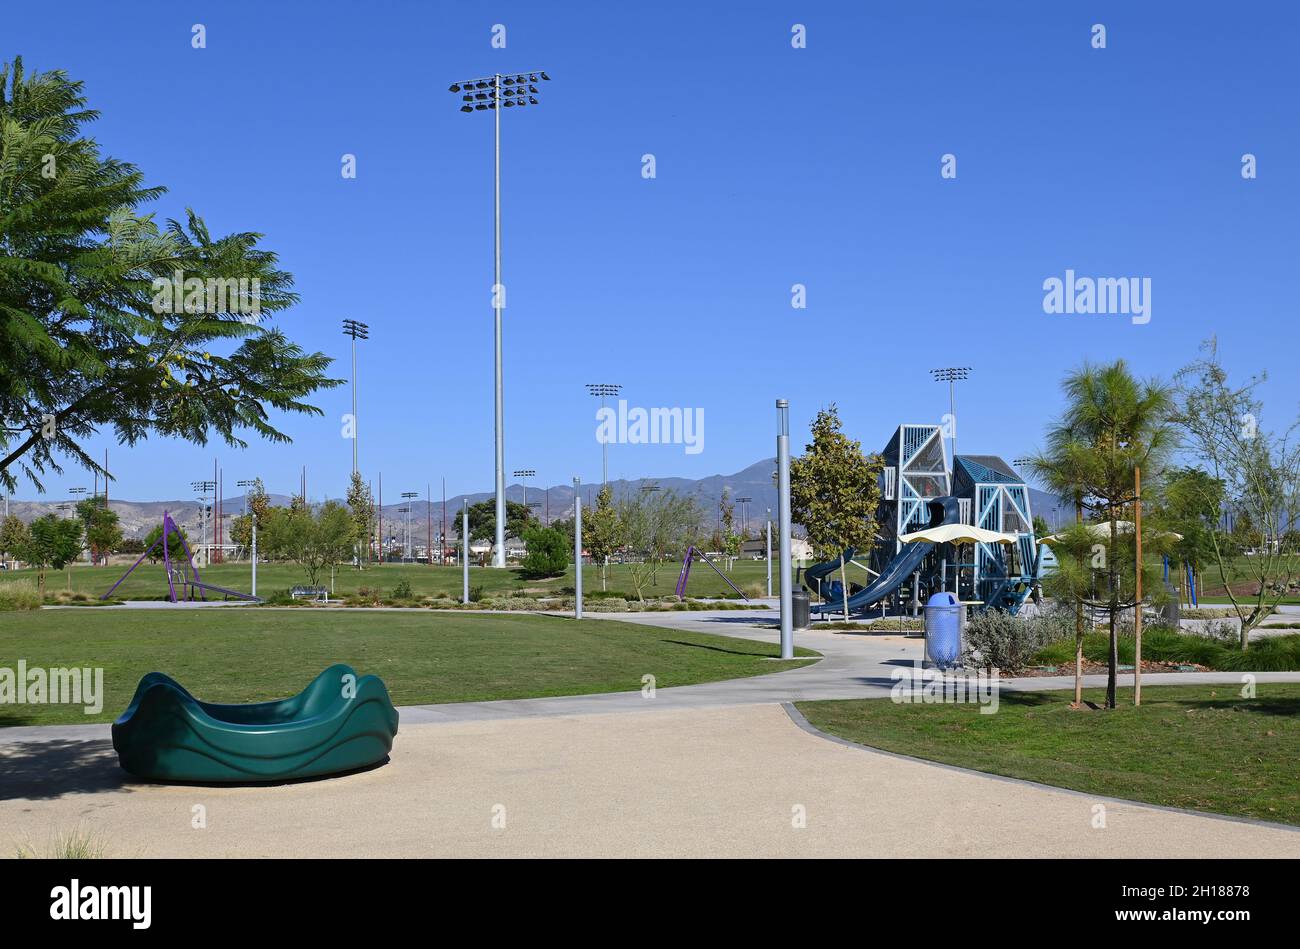 IRVINE, CALIFORNIA - 15 OCT 2021: The Kids Play Area with various equipment for young children. Stock Photo